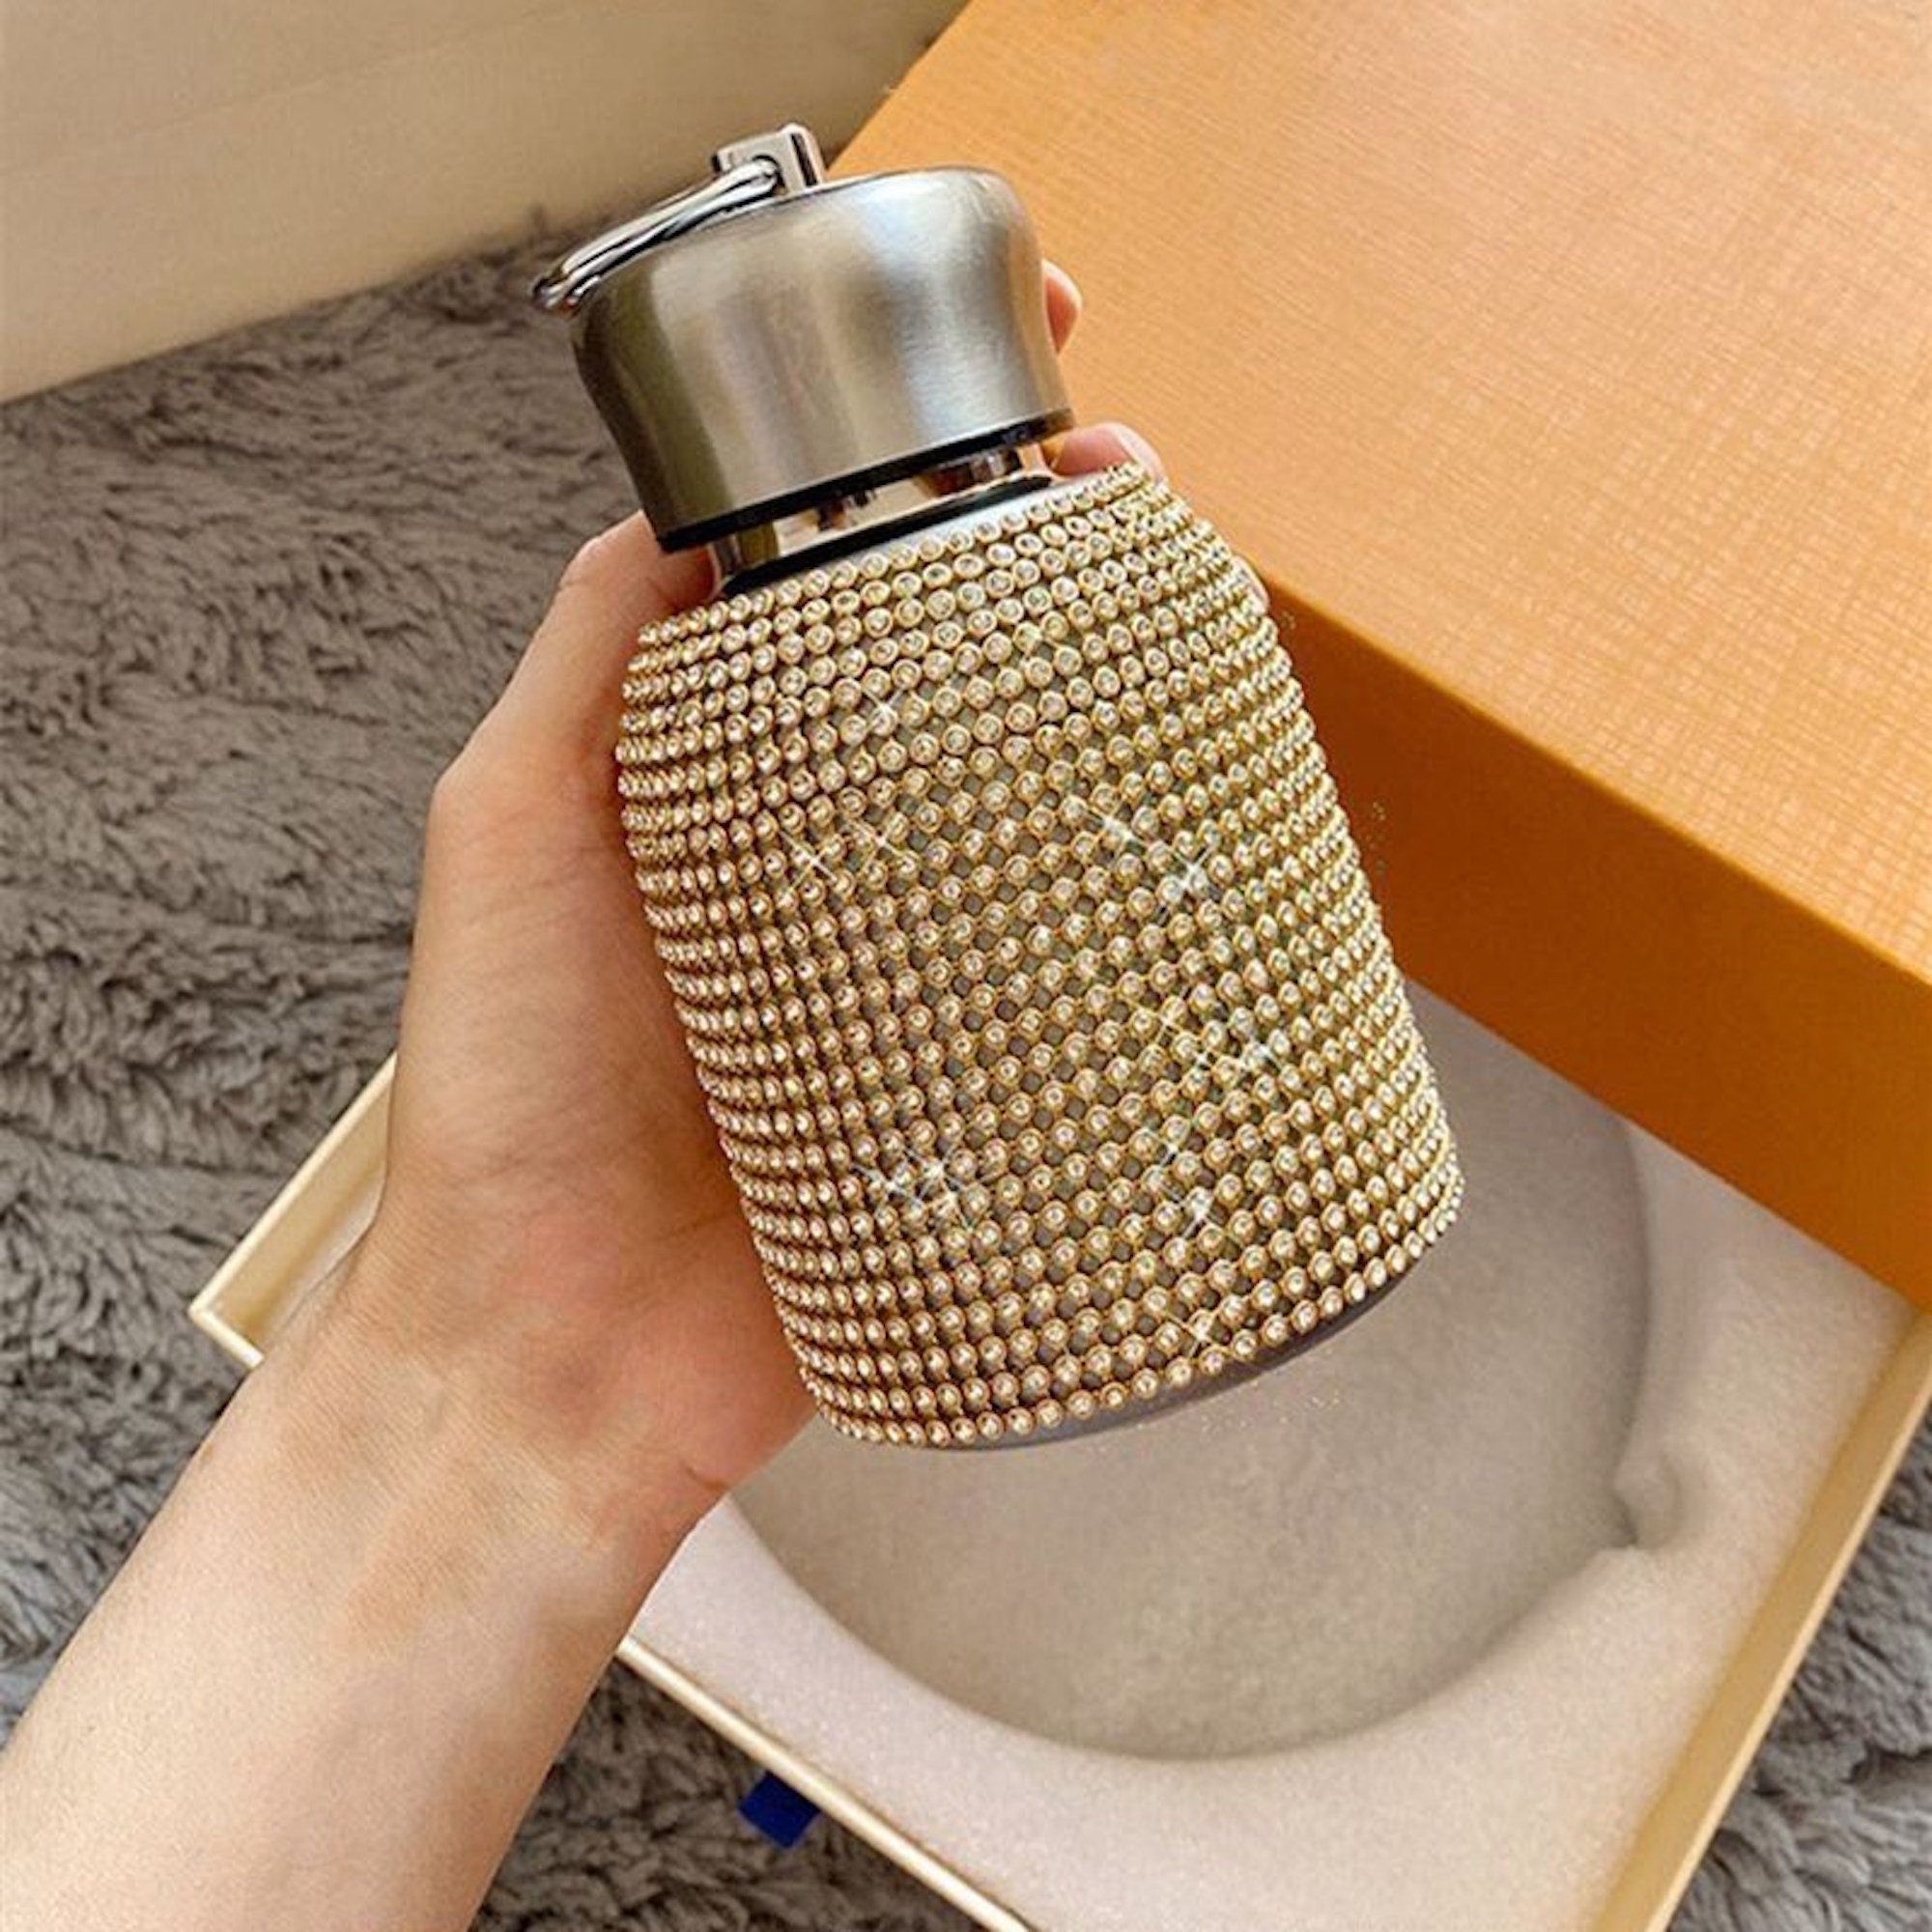 Thermos Unique Gift Rhinestone Studded 250ml High Fashion Water Bottle With Long Cross Body Carrying Chain Stainless Steel Hot and Cold Lid  34.99 Indigo Paisley